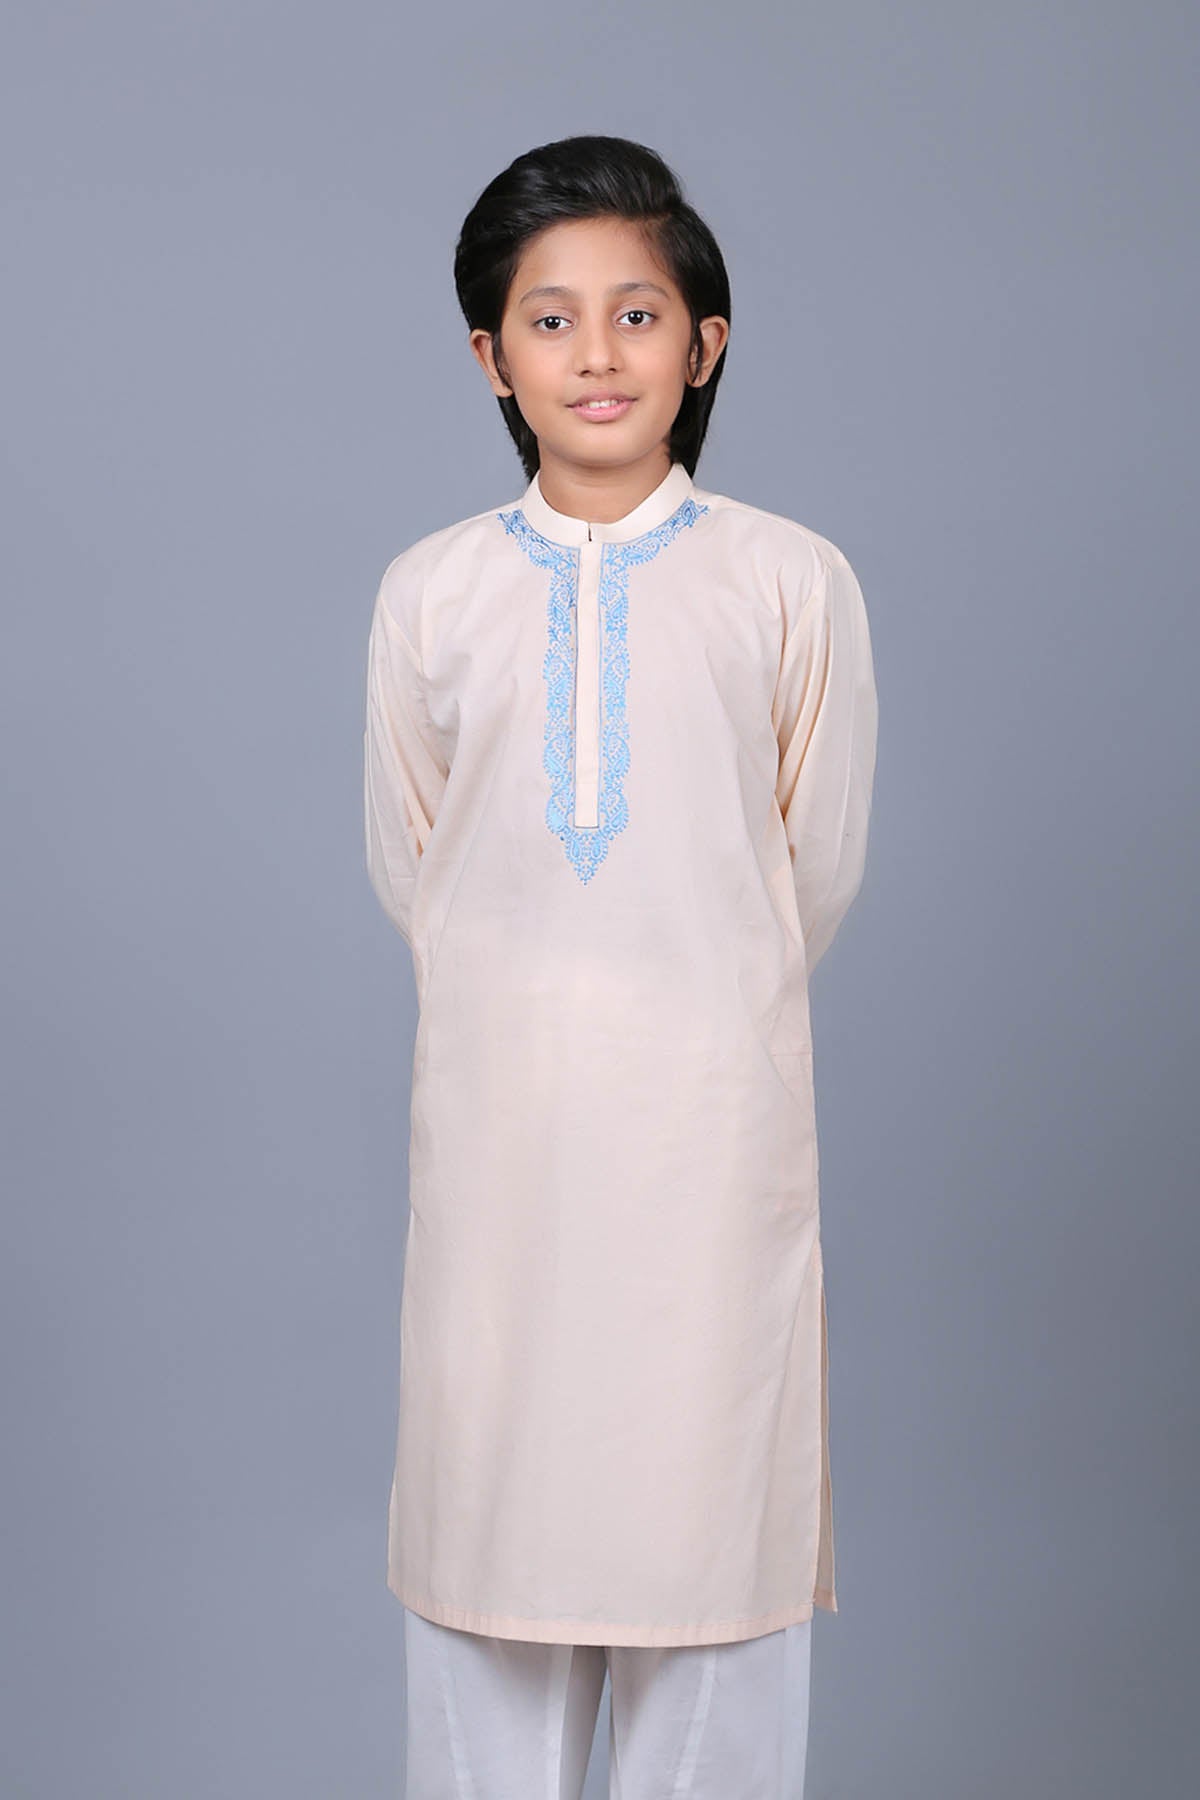 EMBROIDERED BOYS SUIT